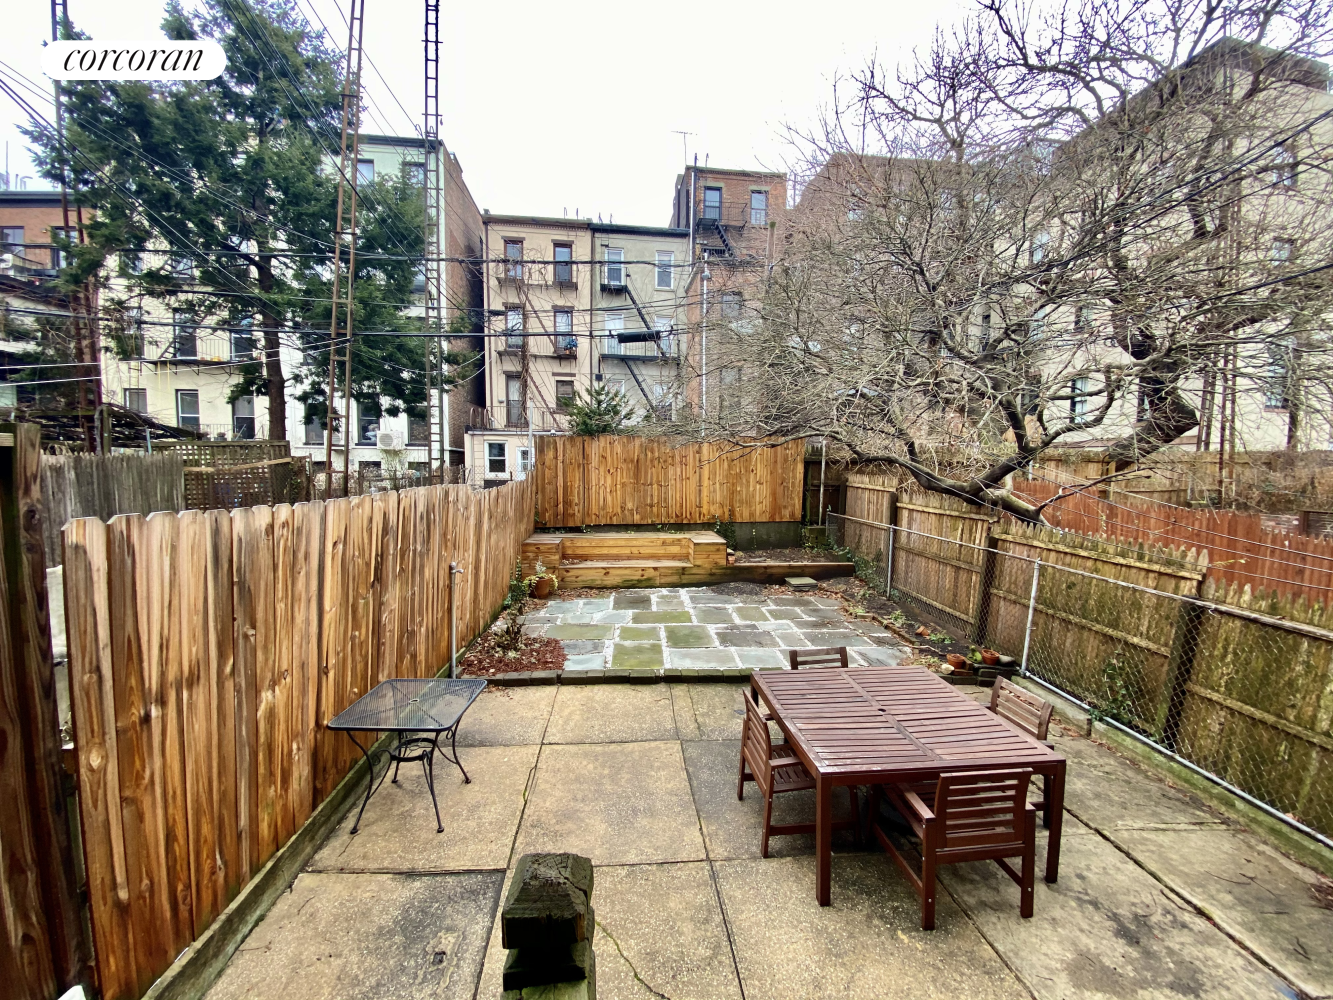 449 Henry Street 1, Cobble Hill, Brooklyn, New York - 2 Bedrooms  
1 Bathrooms  
4 Rooms - 